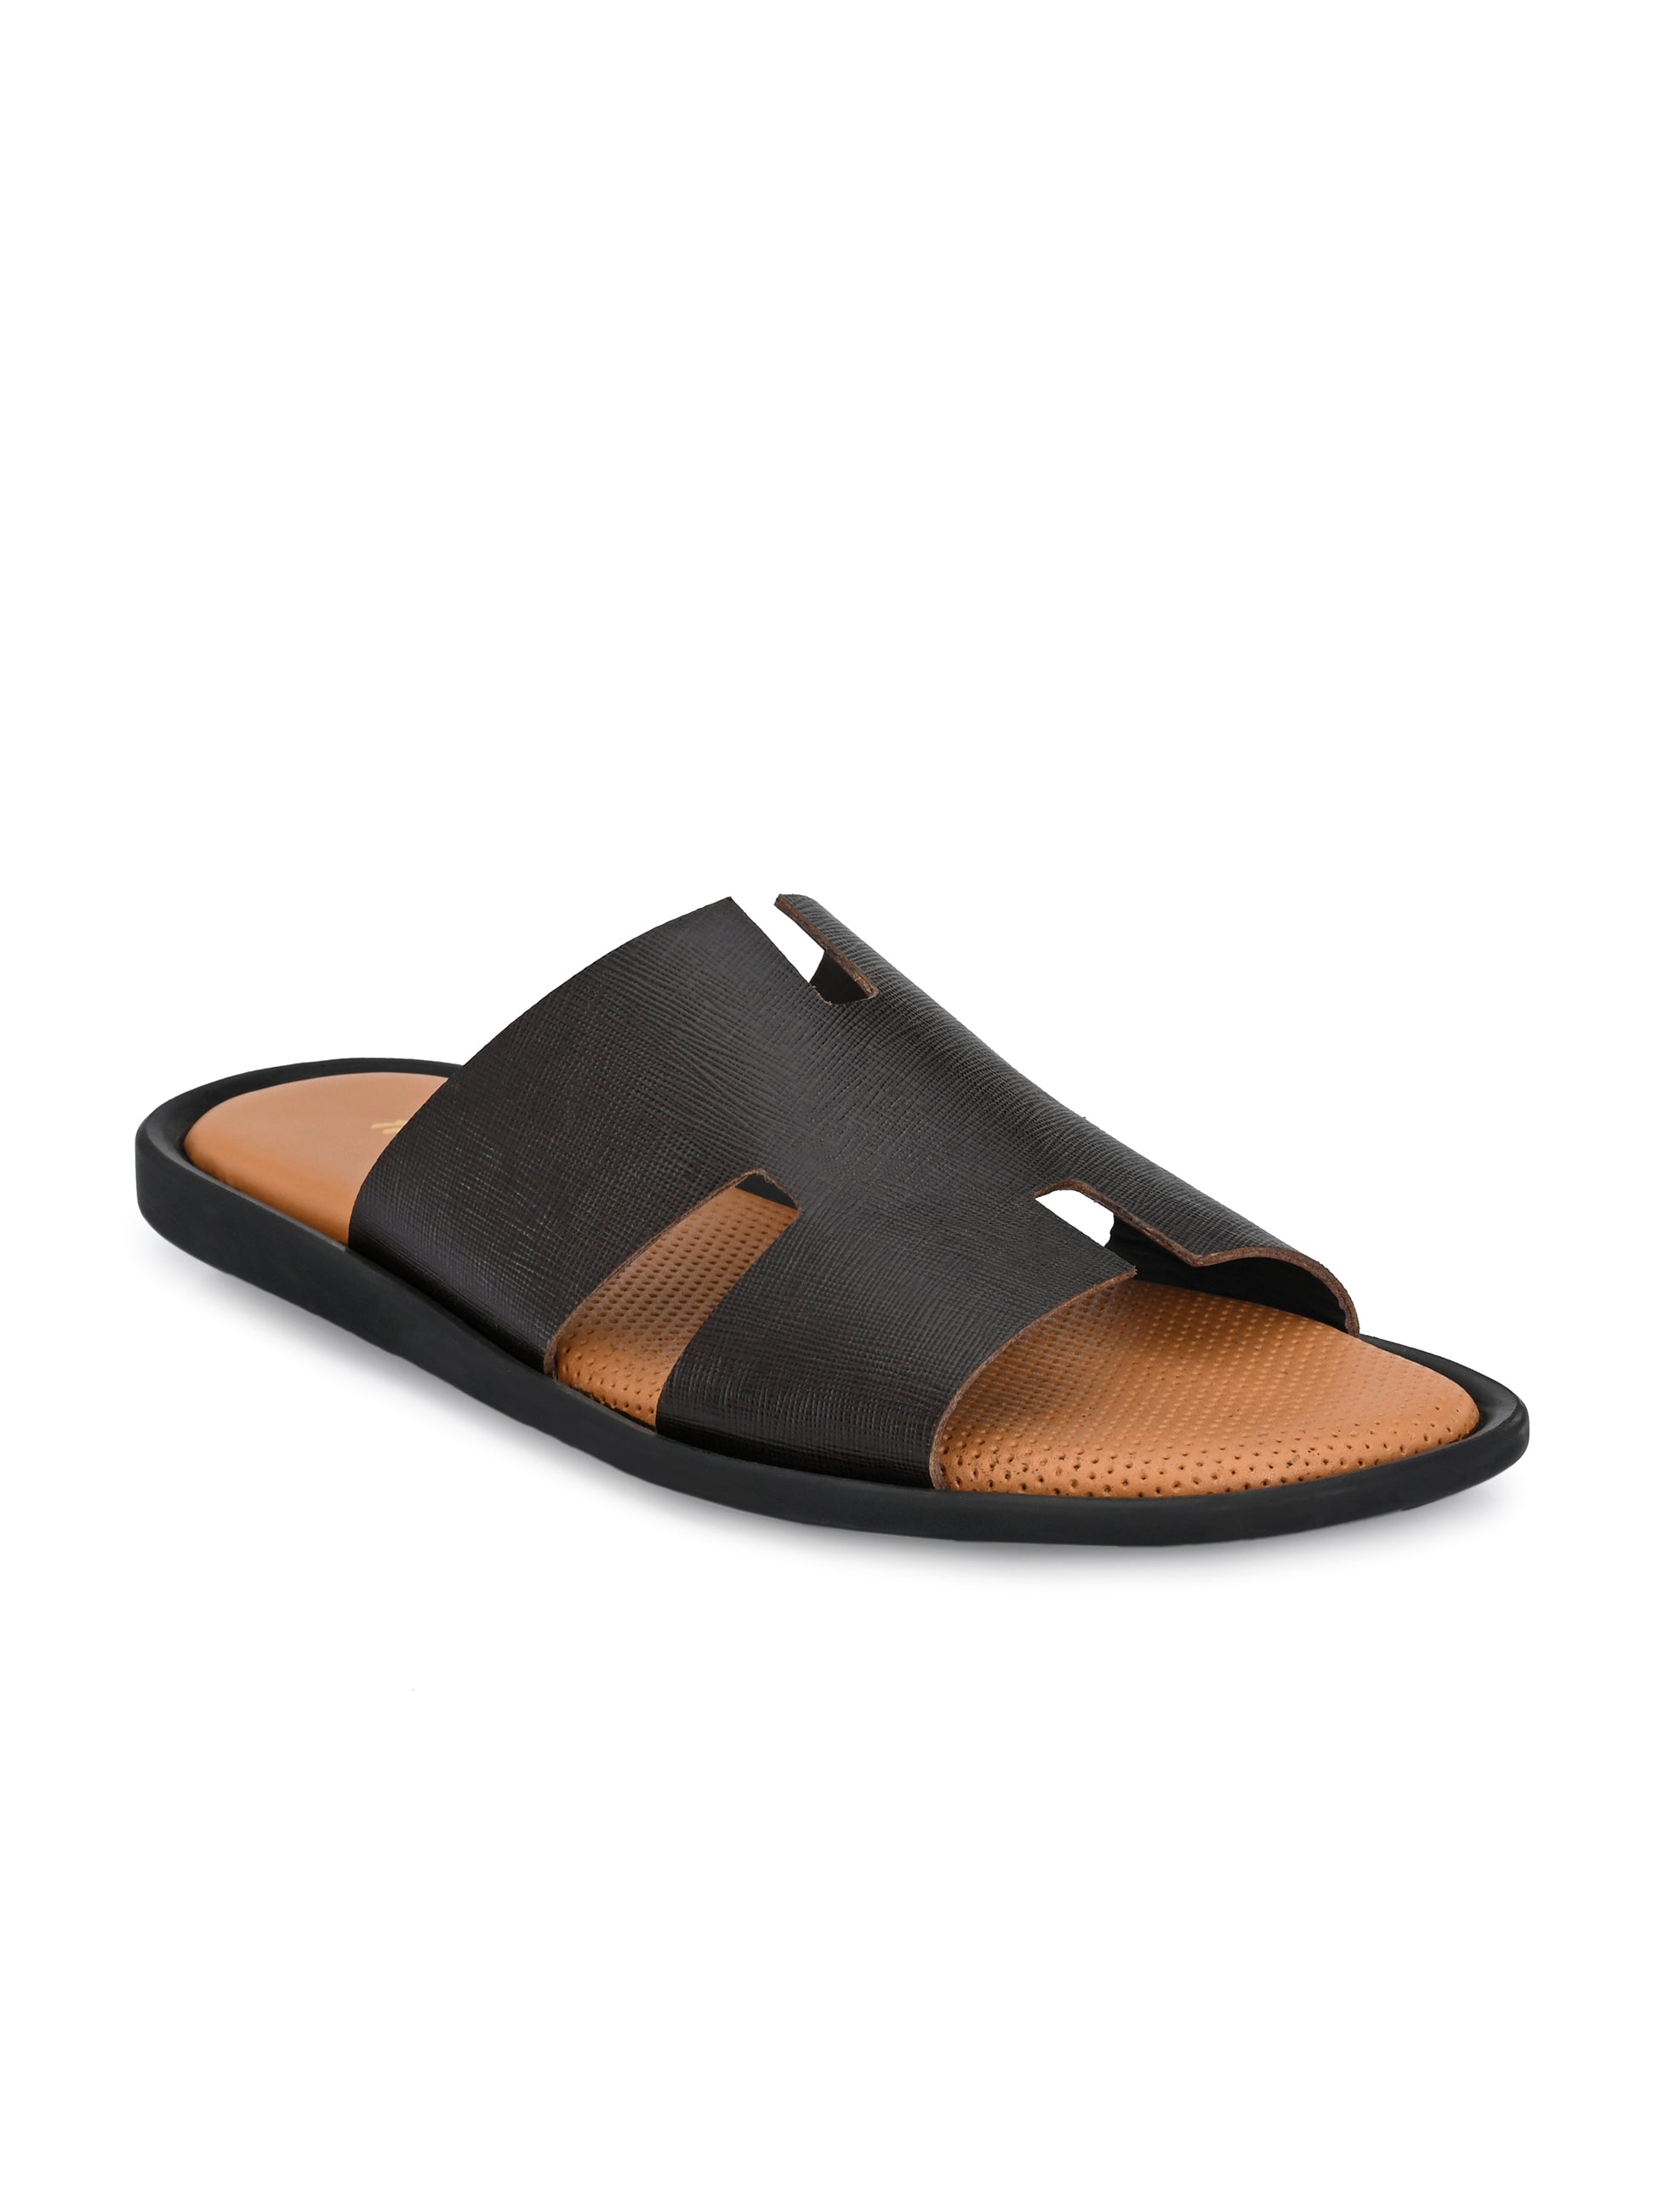 Liberty Coolers Men's Formal Slippers (Brown) in Ludhiana at best price by  Liberty Exclusive Showroom - Justdial